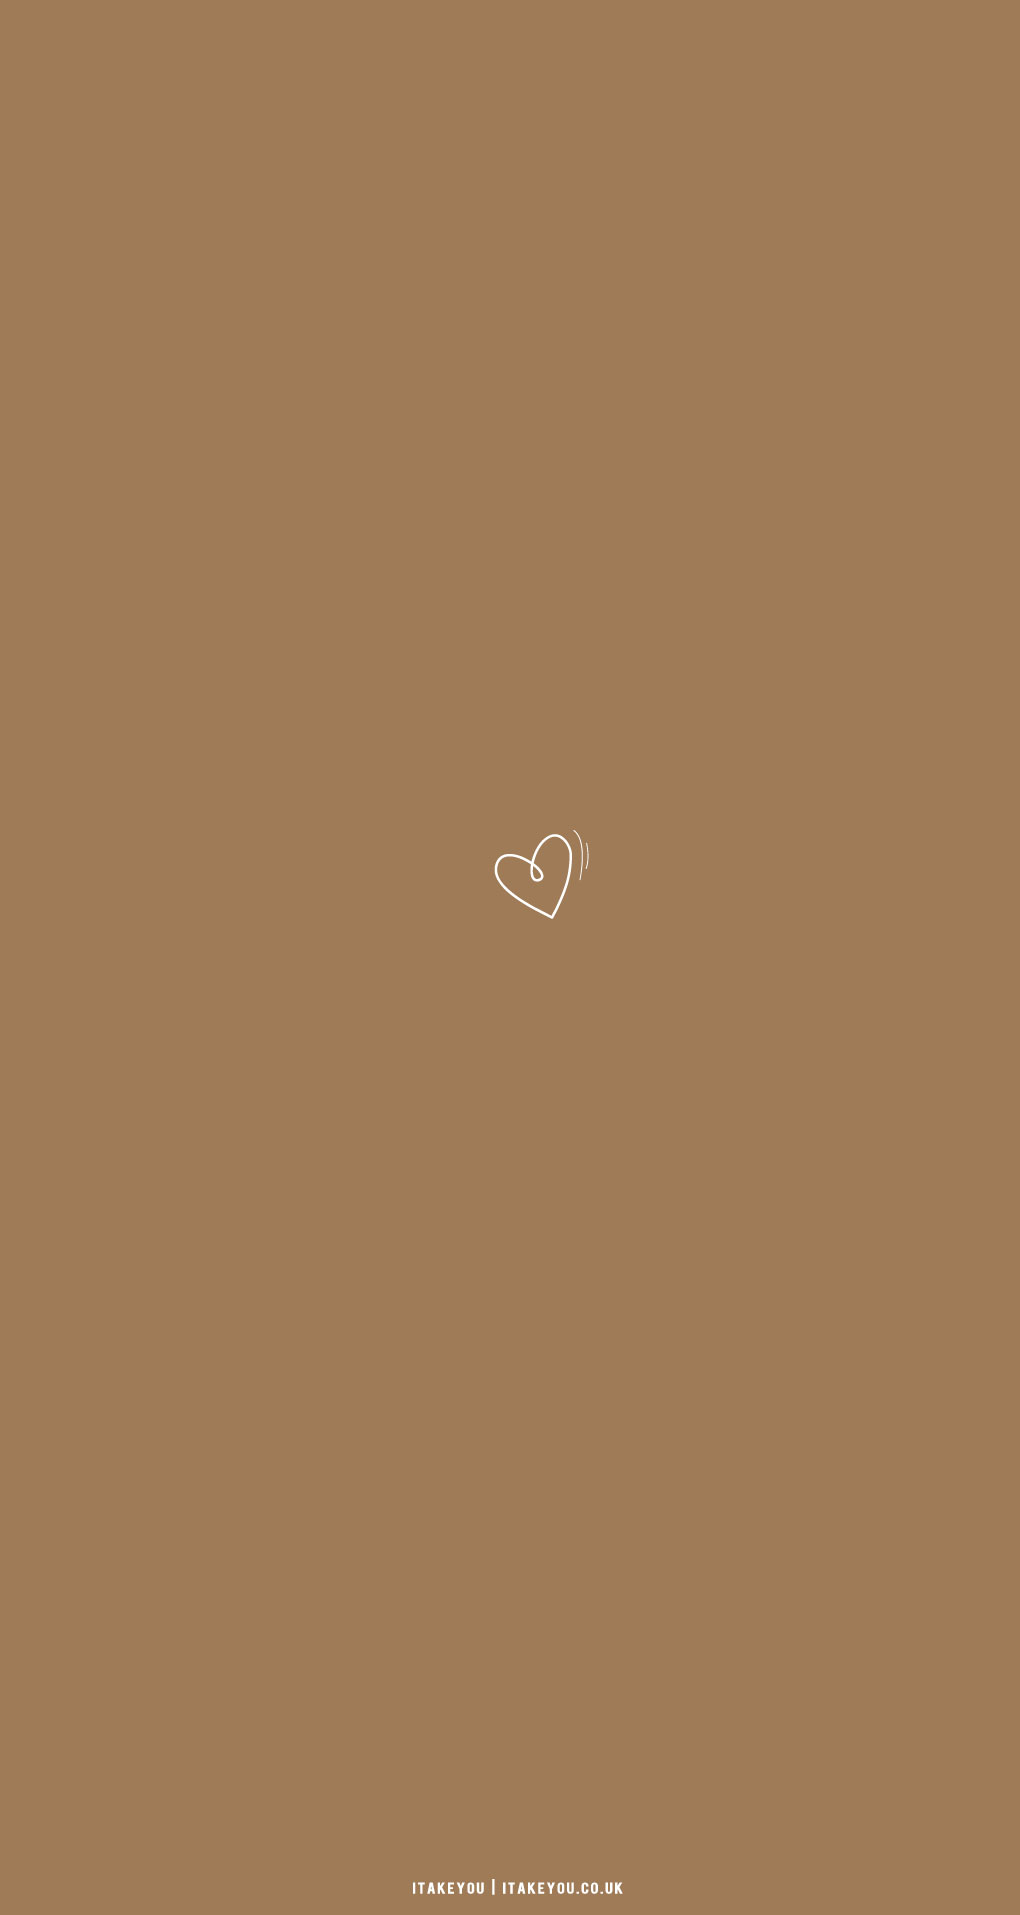 Cute Brown Aesthetic Wallpaper for Phone, Heart Shakes I Take You. Wedding Readings. Wedding Ideas